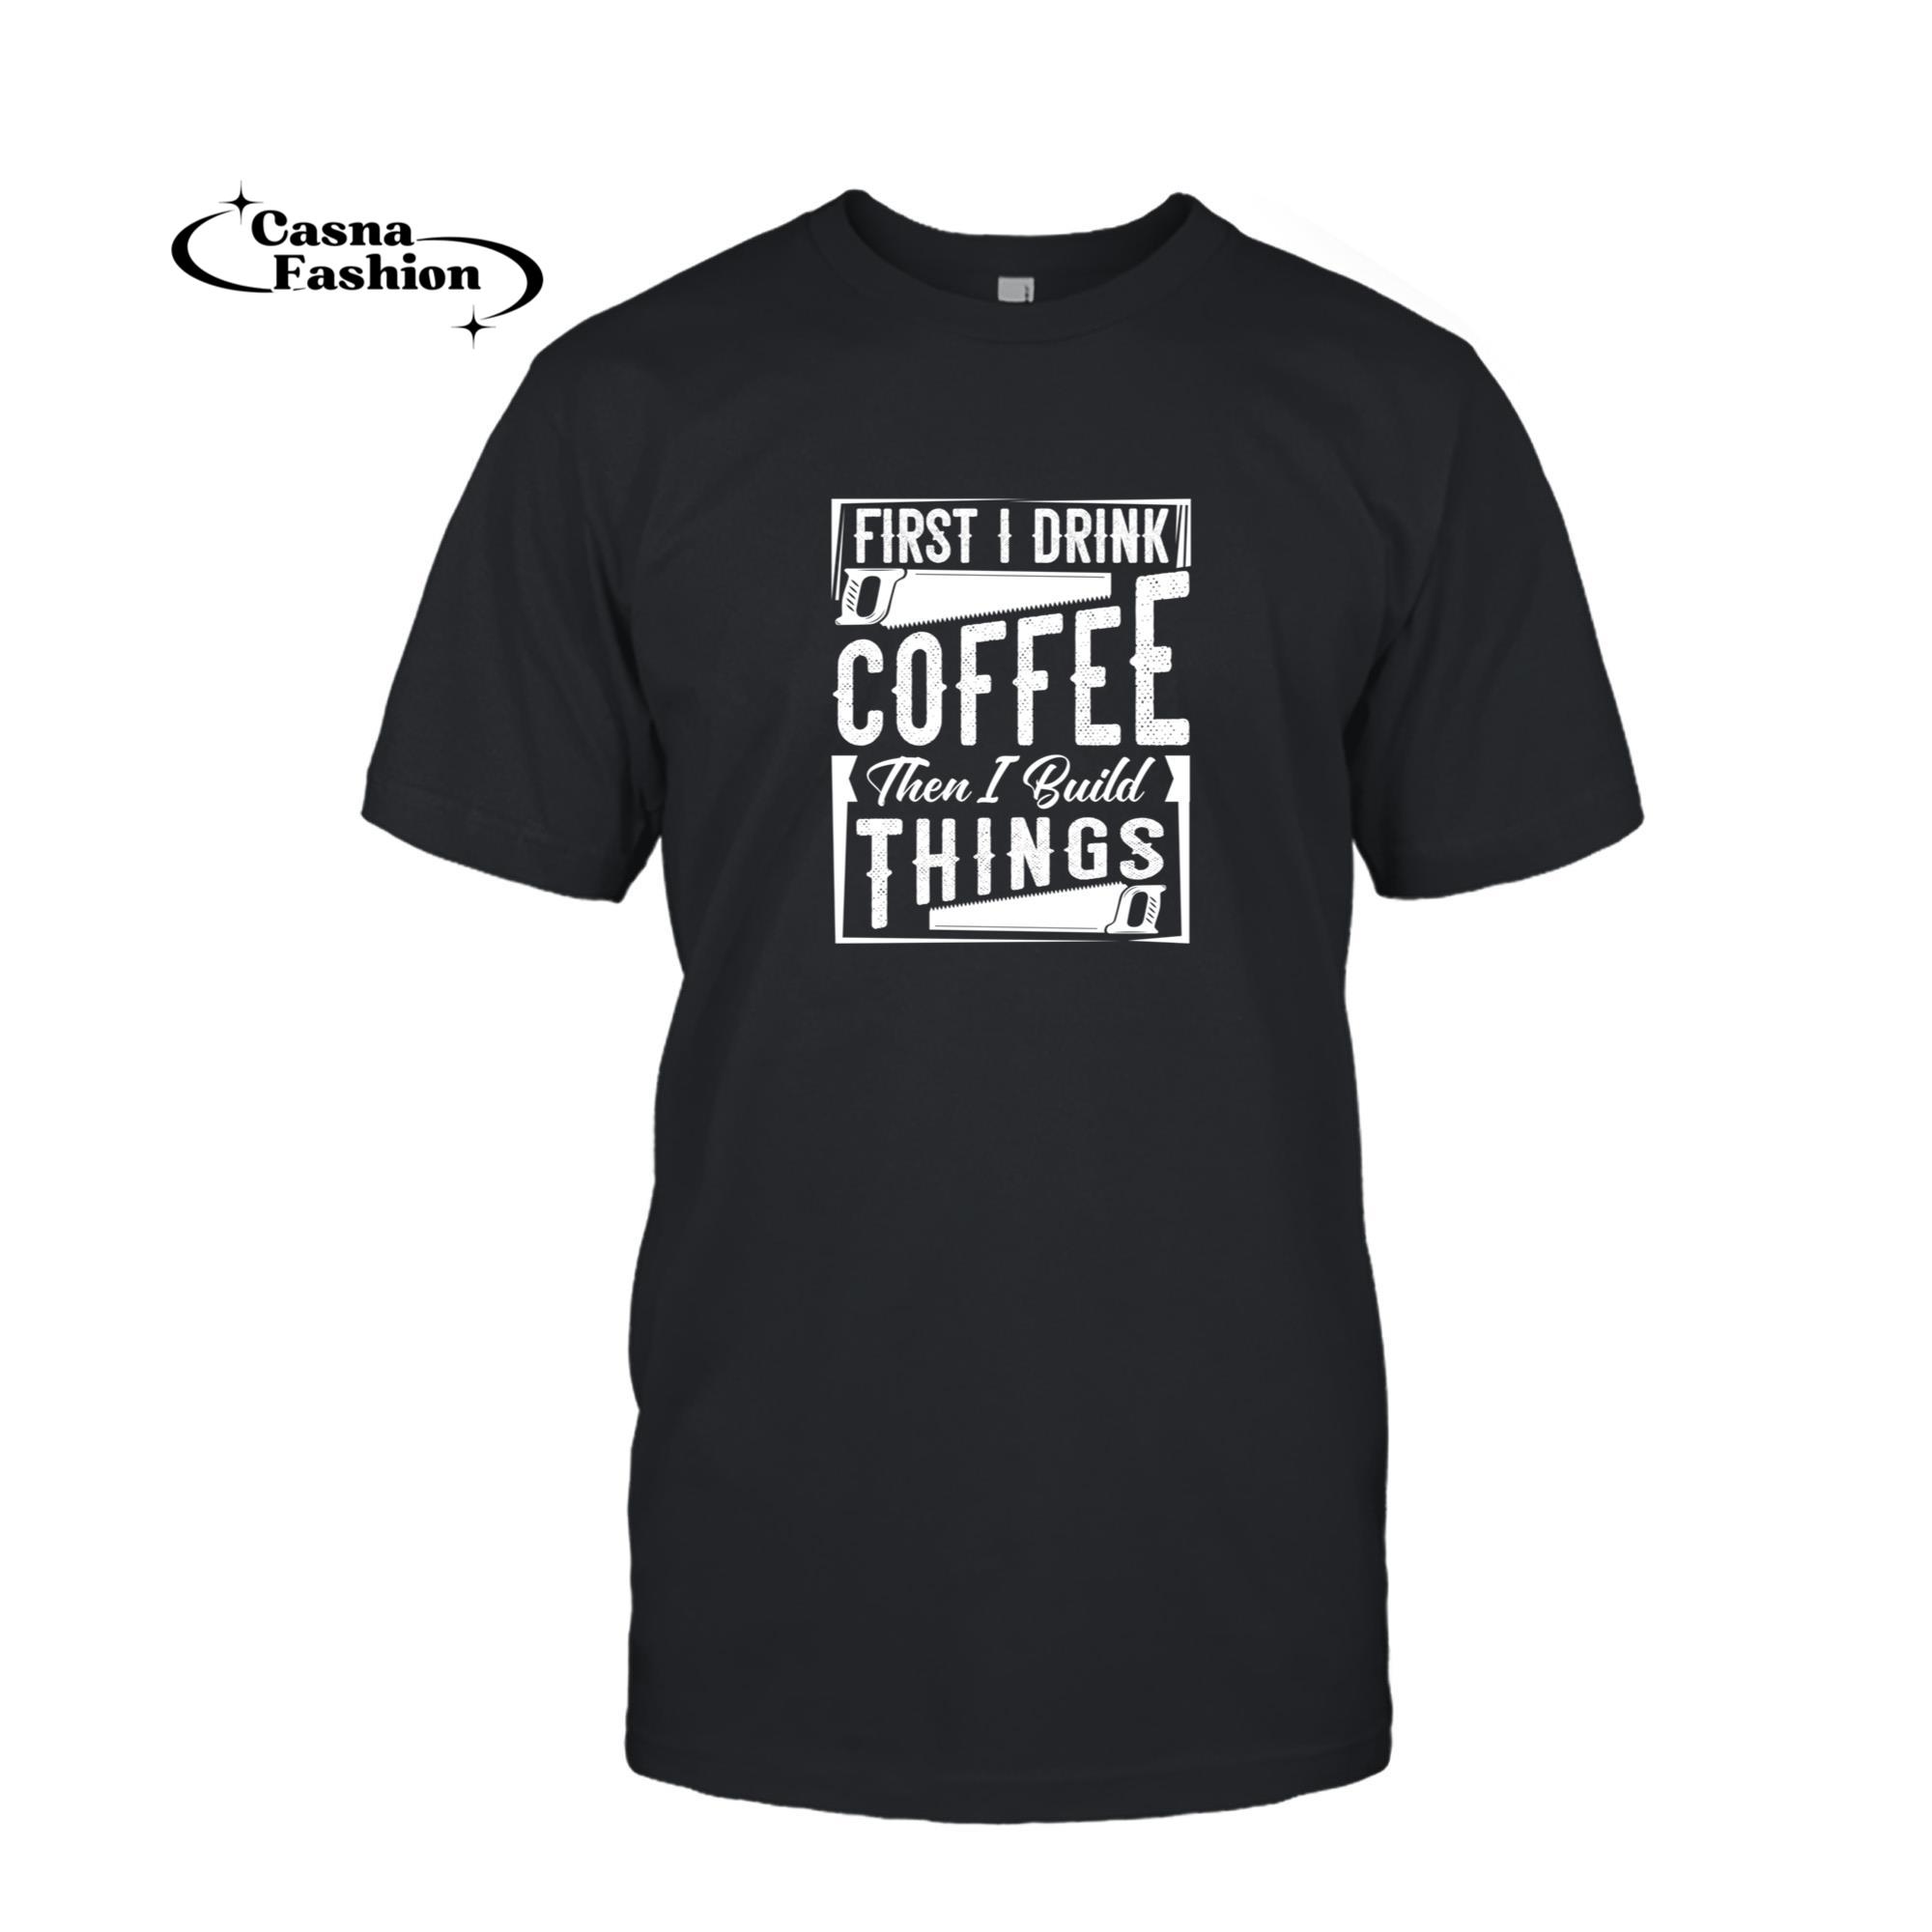 casnafashion_T-shirt_First I Drink Coffee Then Build Things Funny Carpenter Gift Pullover Hoodie_T-shirt_Black